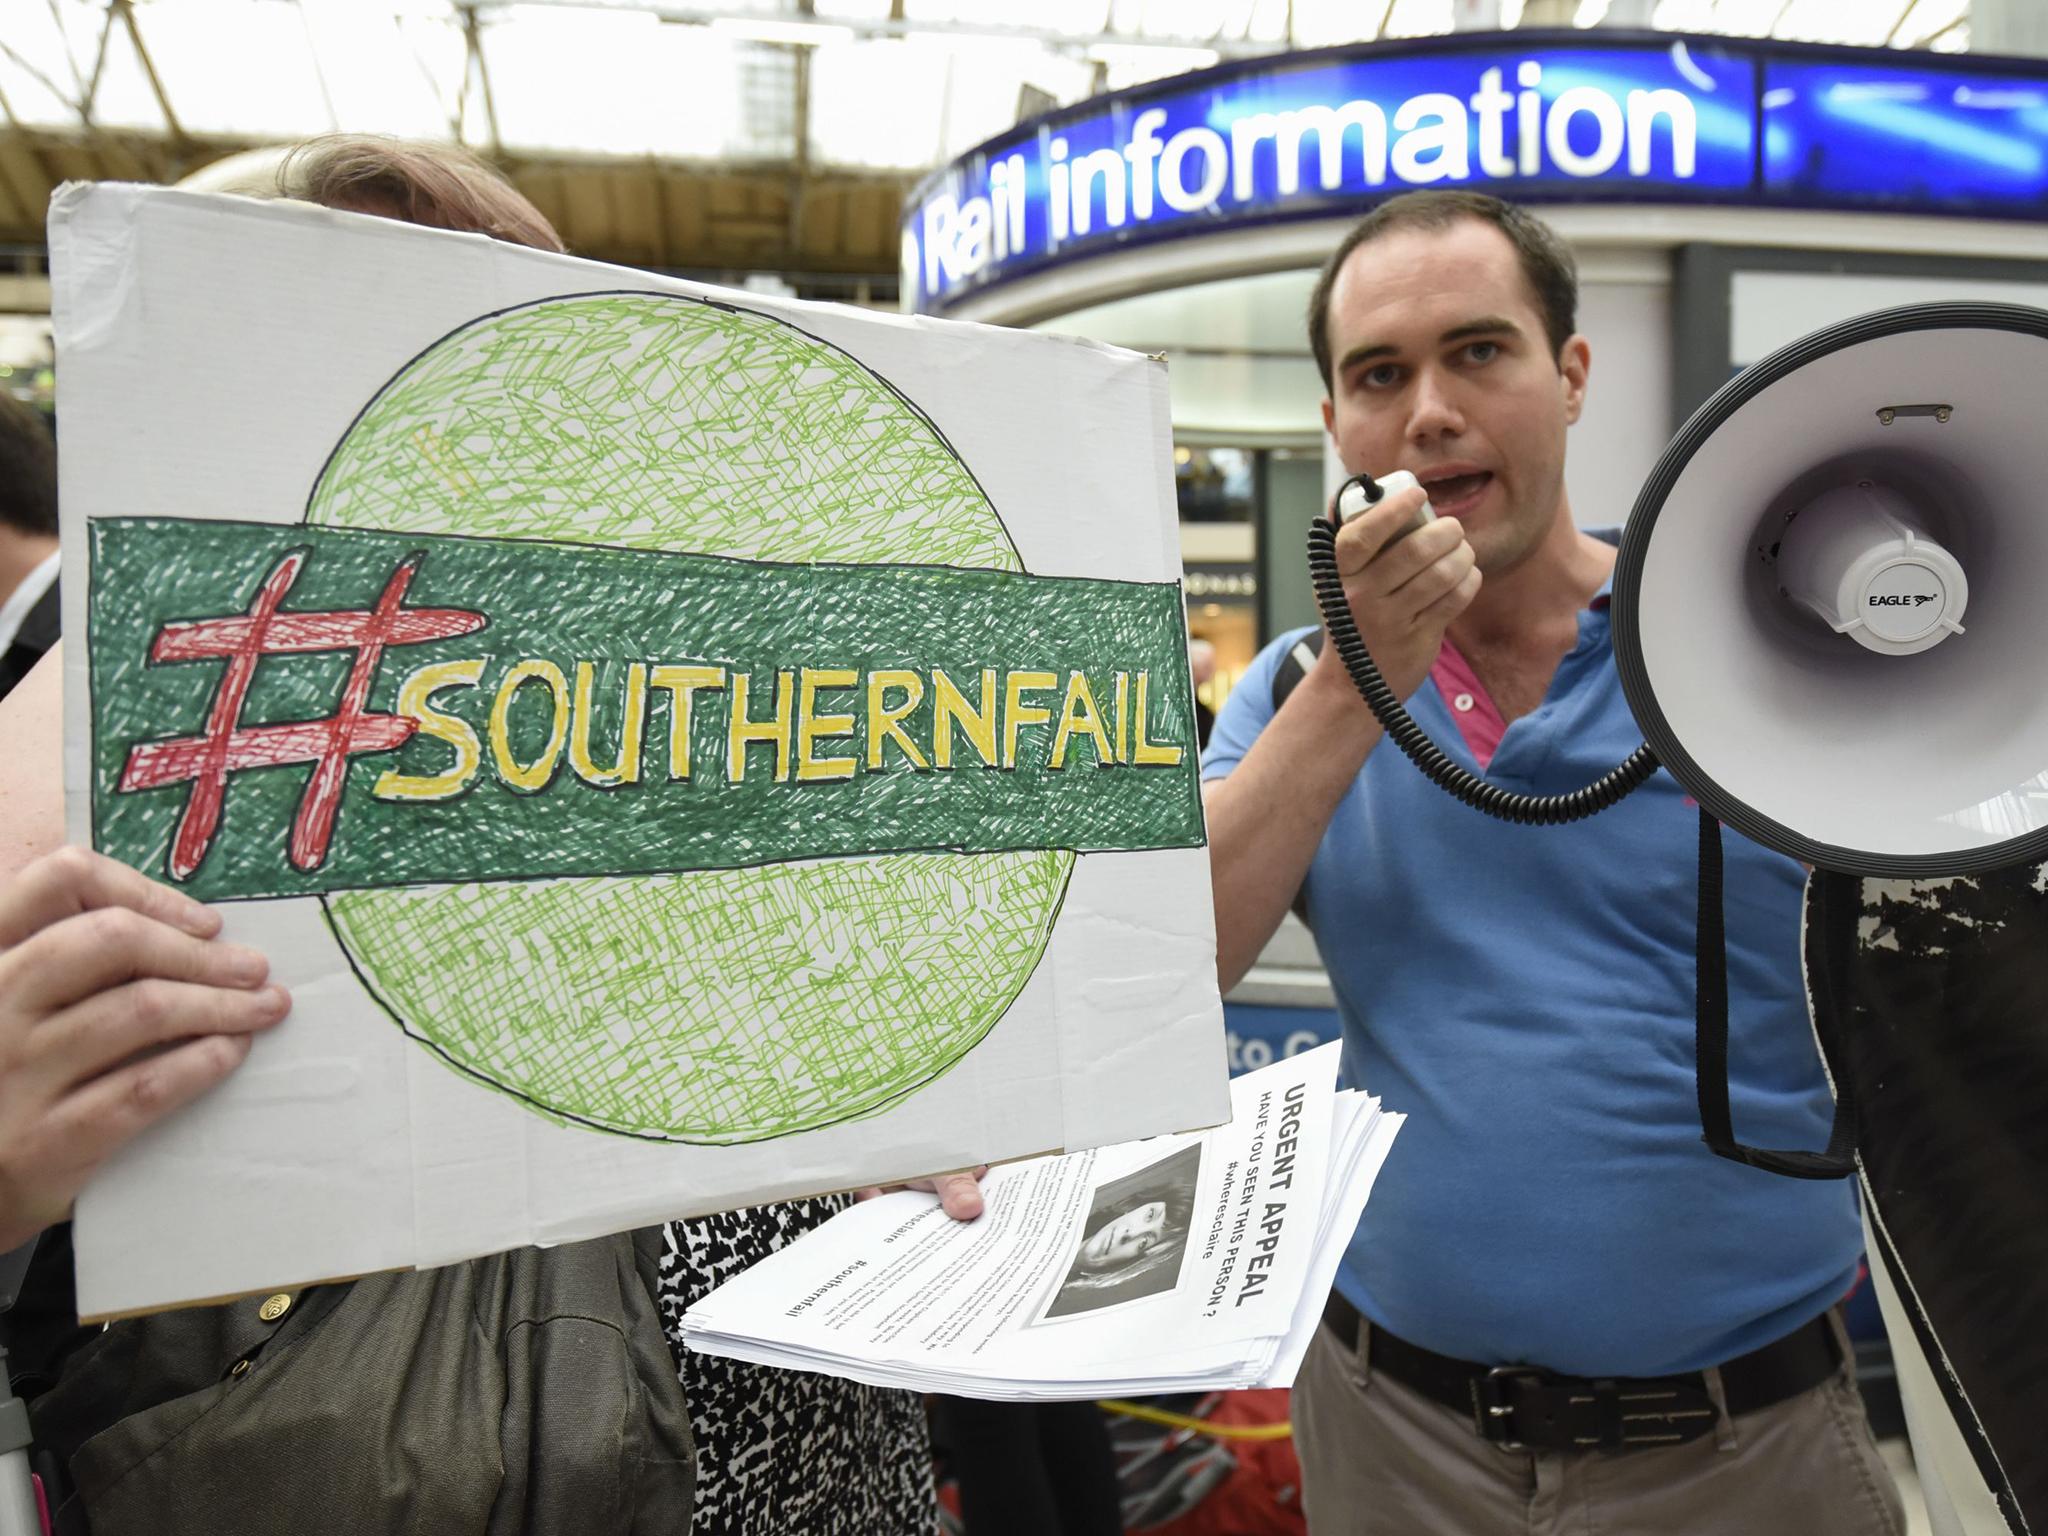 Passengers stage a 'fare strike' and protest at Victoria Station in central London over the performance of Southern Rail